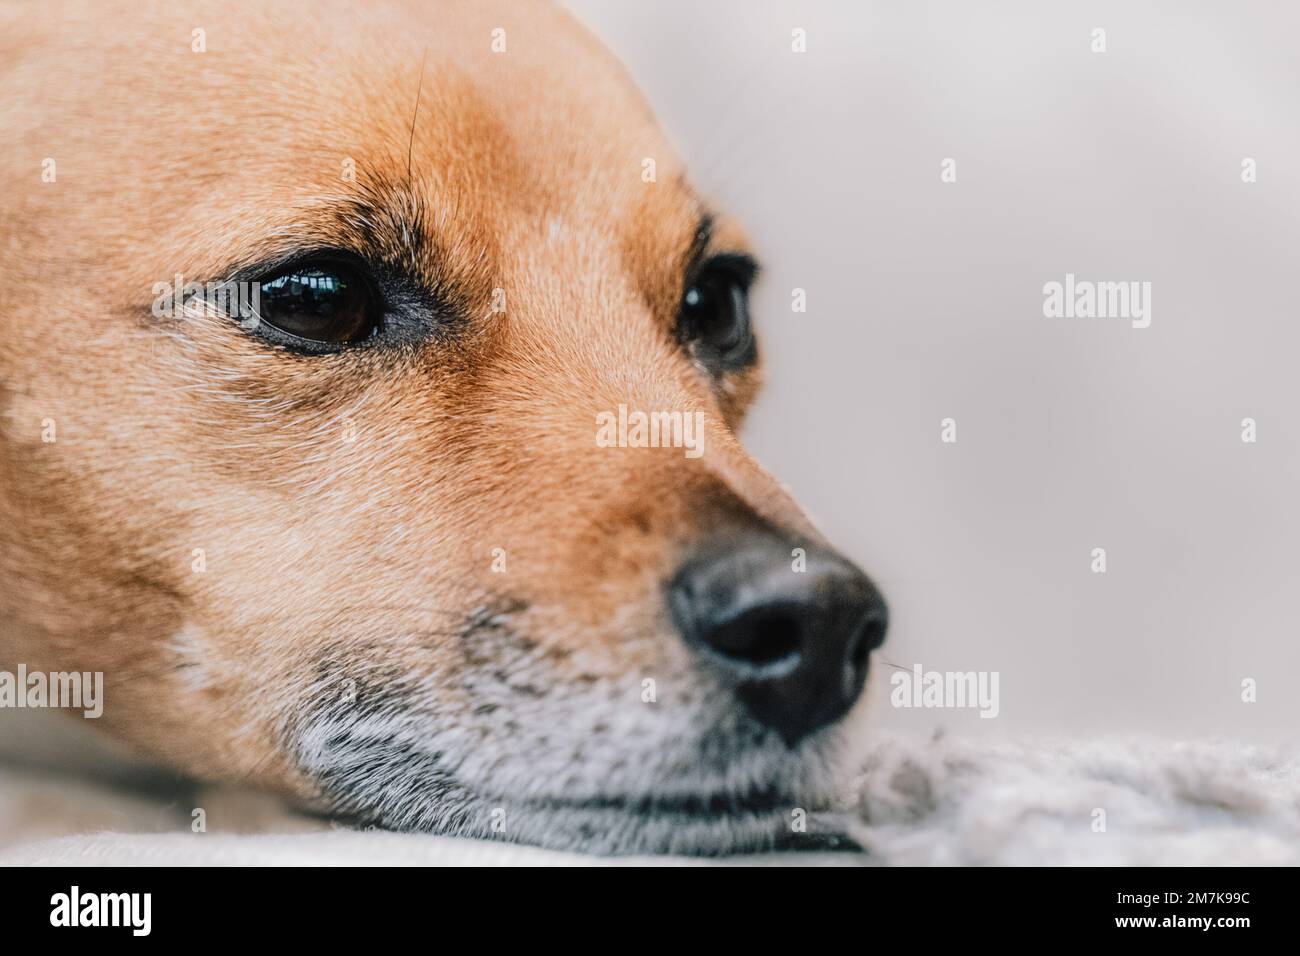 Adorable and cute Jack Russell Terrier dog portrait. Headshot of a dog from a dog photography photoshoot. Stock Photo